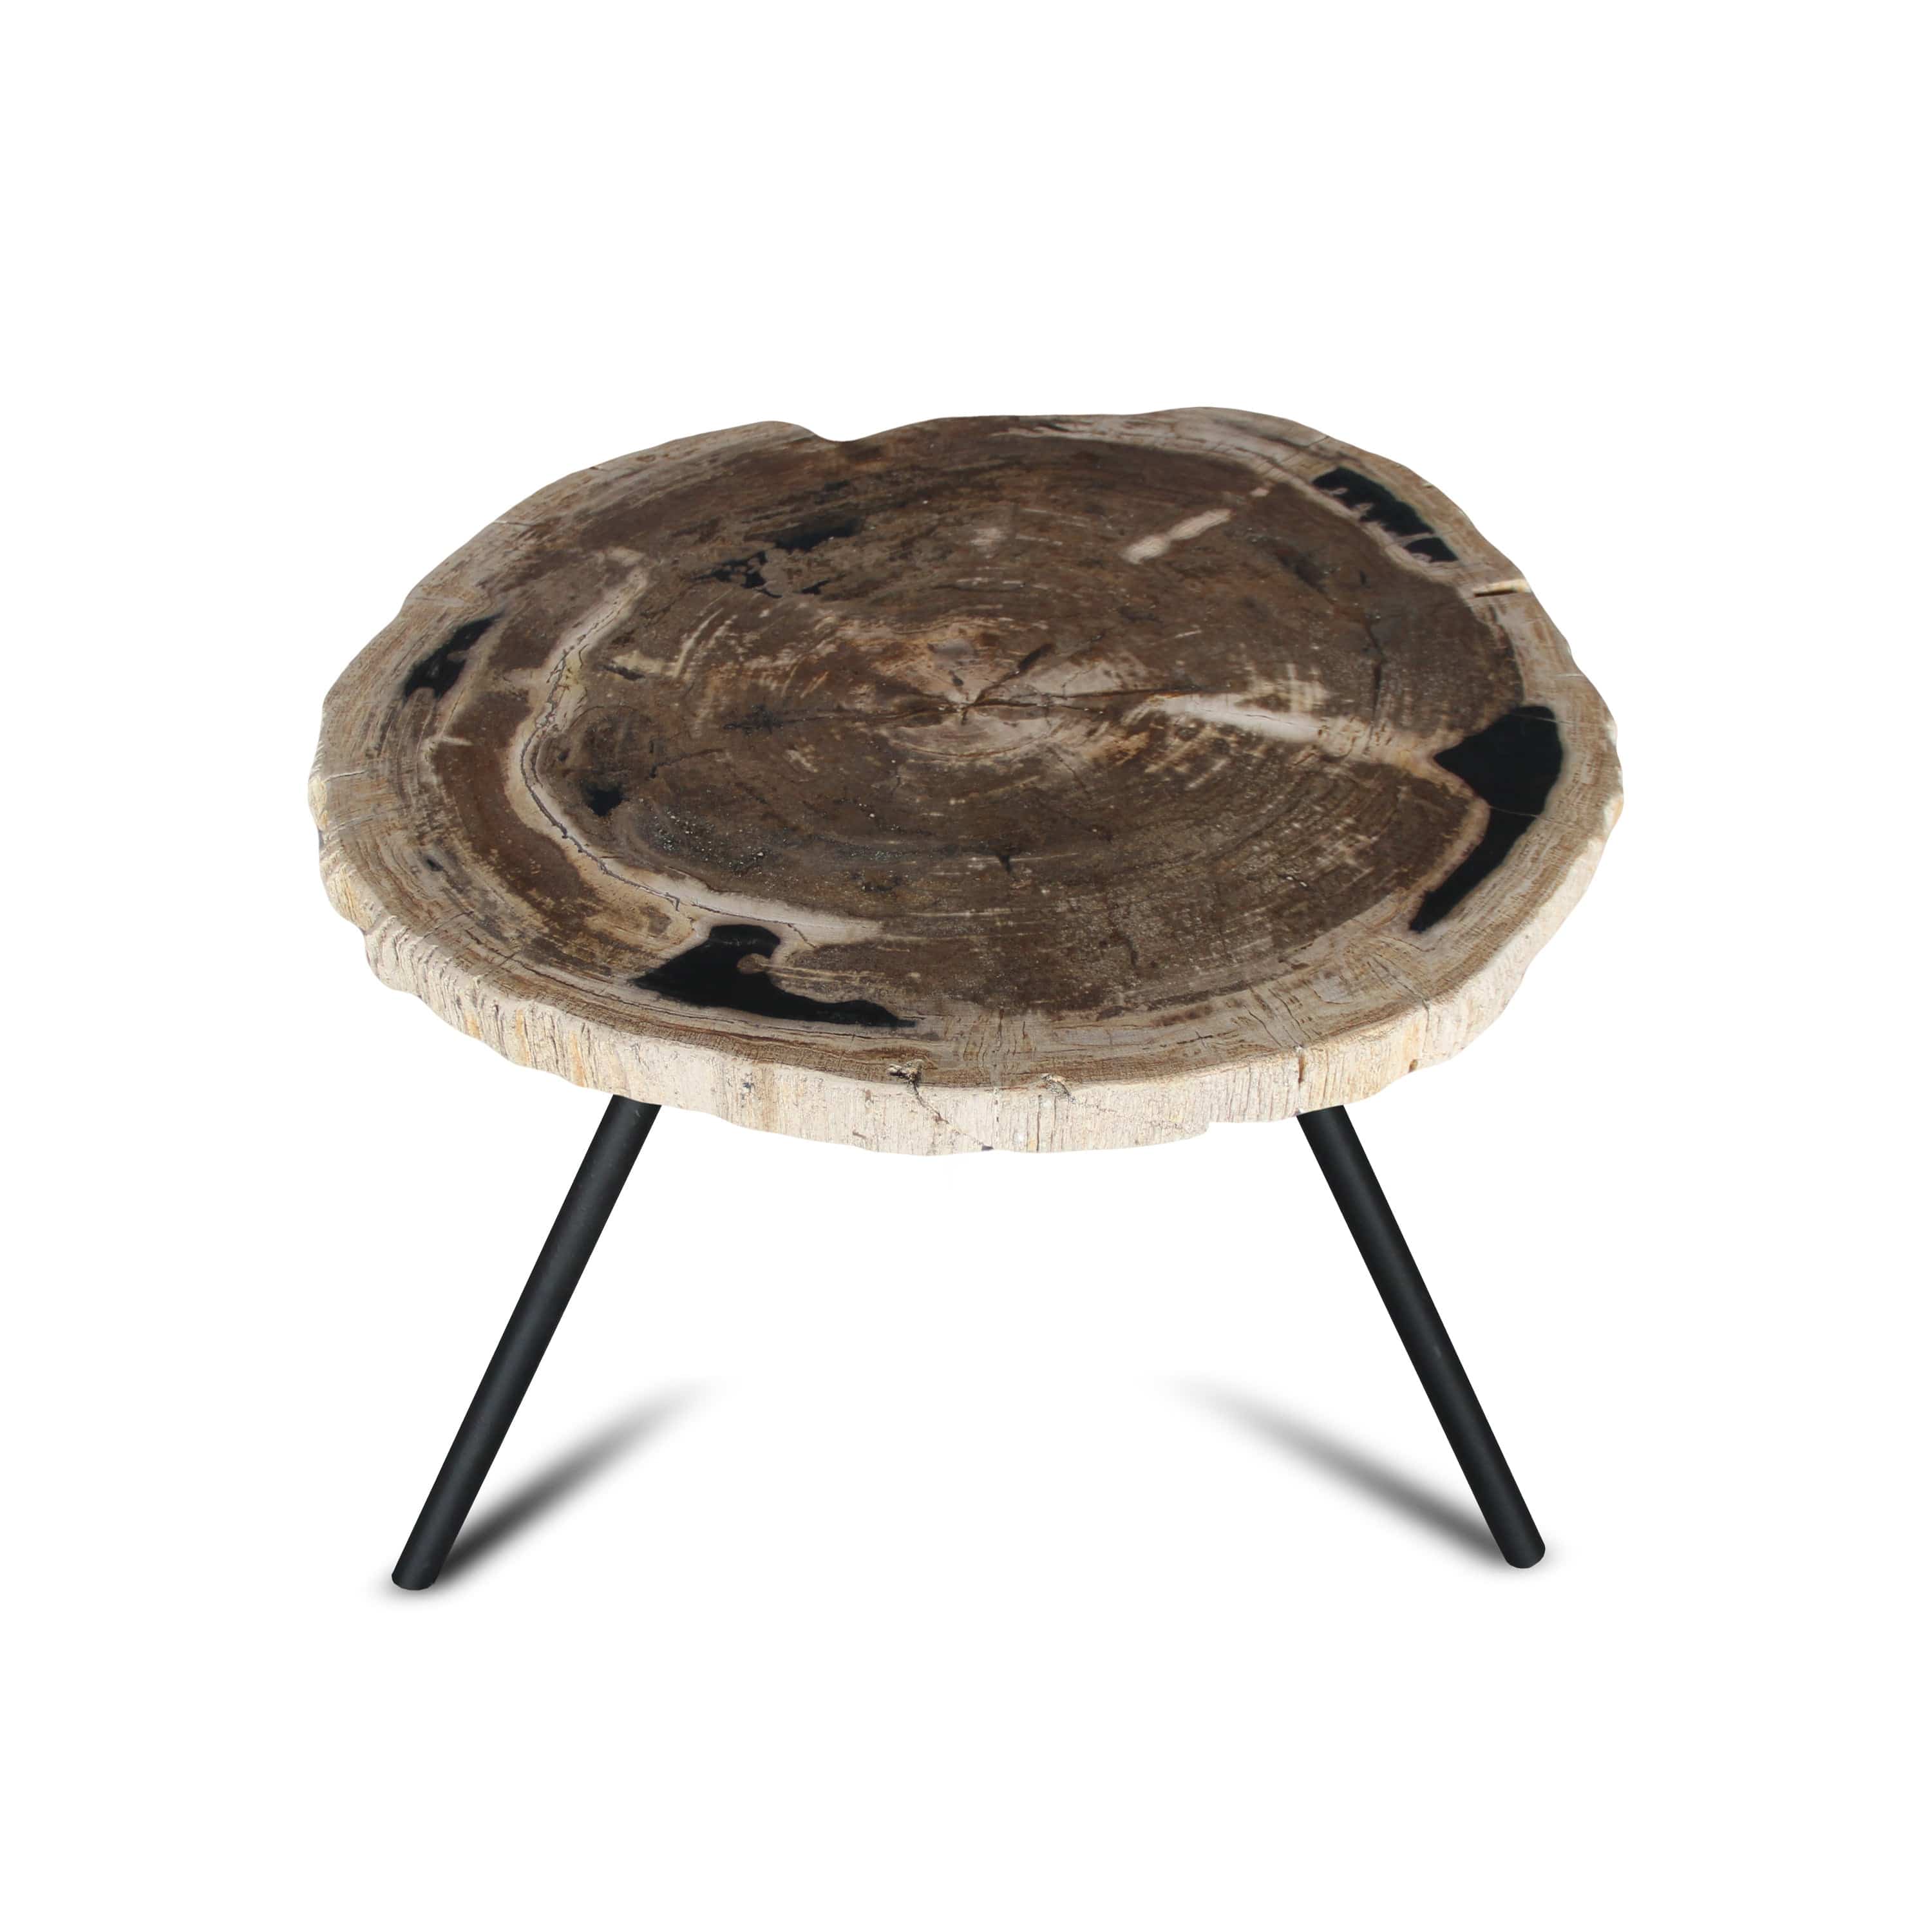 Kalifano Petrified Wood Petrified Wood Round Slice Side Table from Indonesia - 25" / 59 lbs PWT2200.003